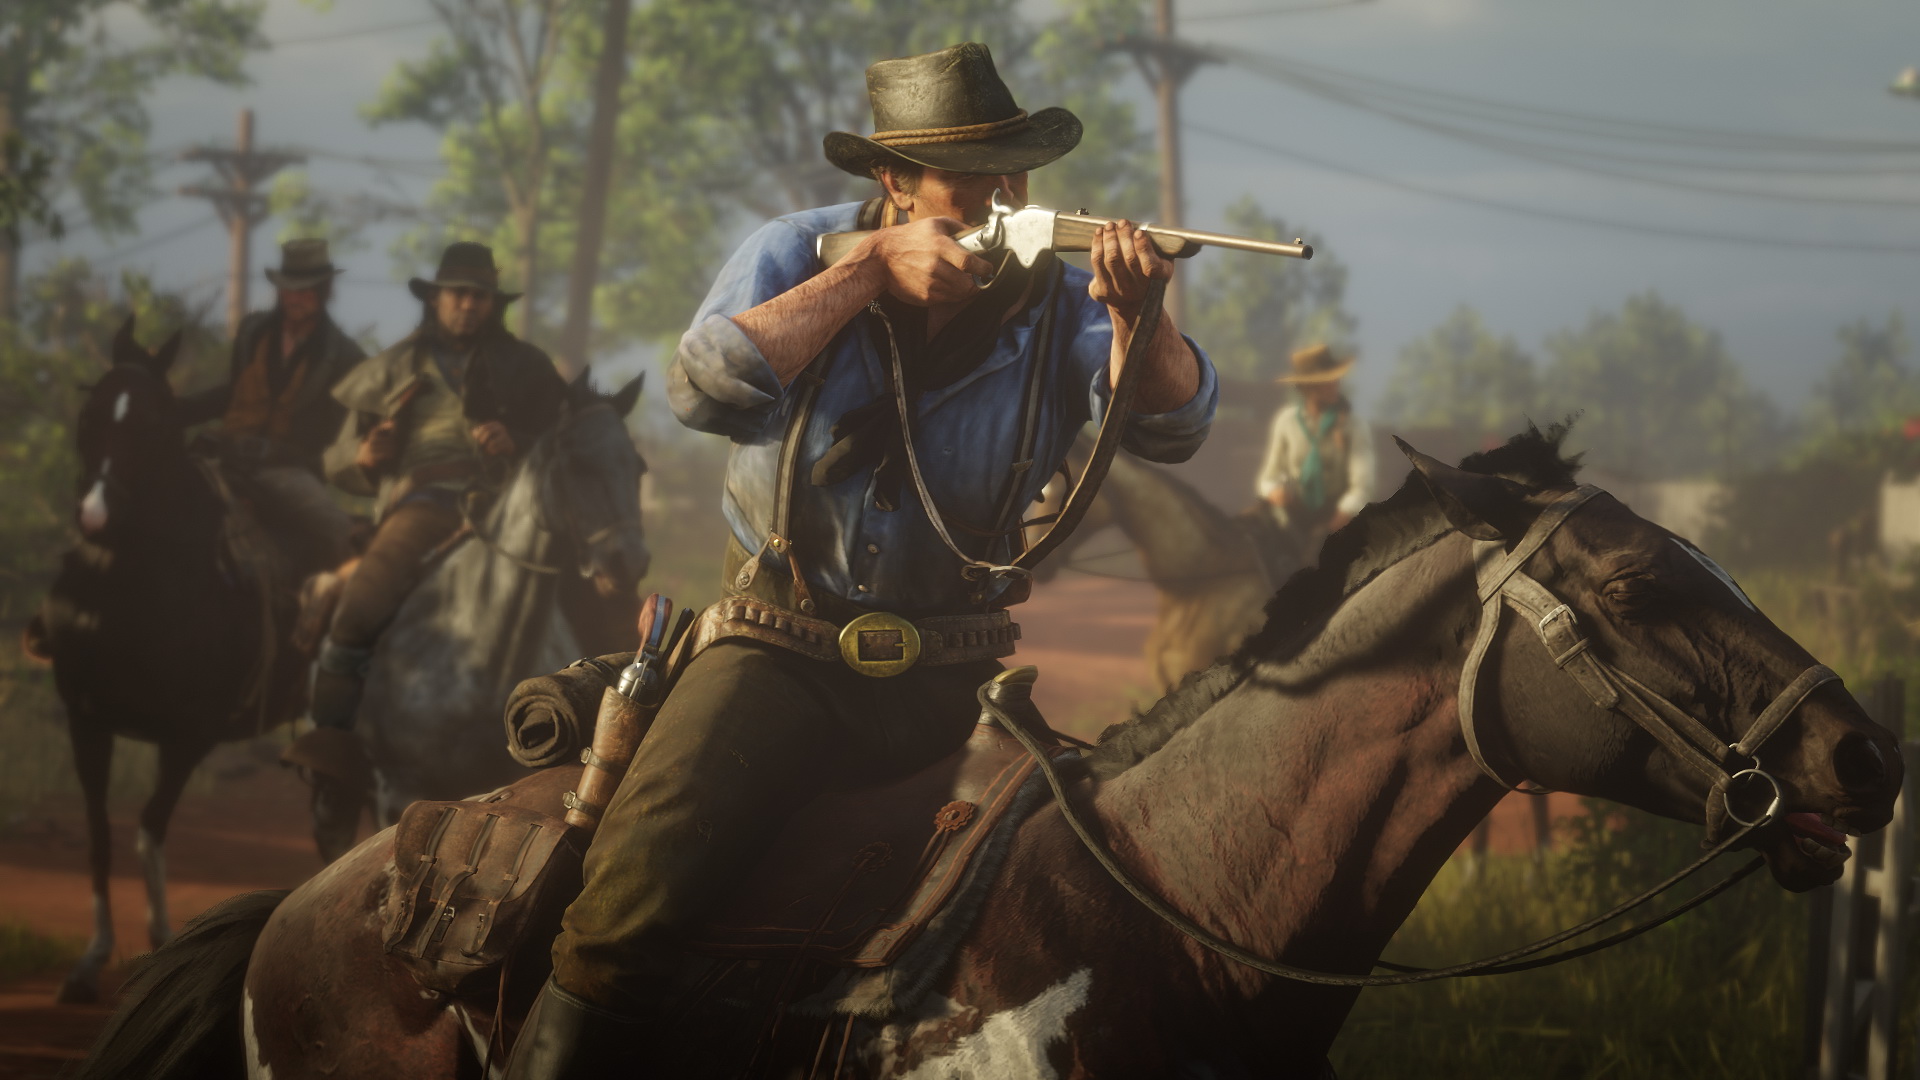 arthur morgan, cowboy, video game, red dead redemption 2, charles smith, horse, john marston, red dead redemption, red dead, sadie adler, weapon, western